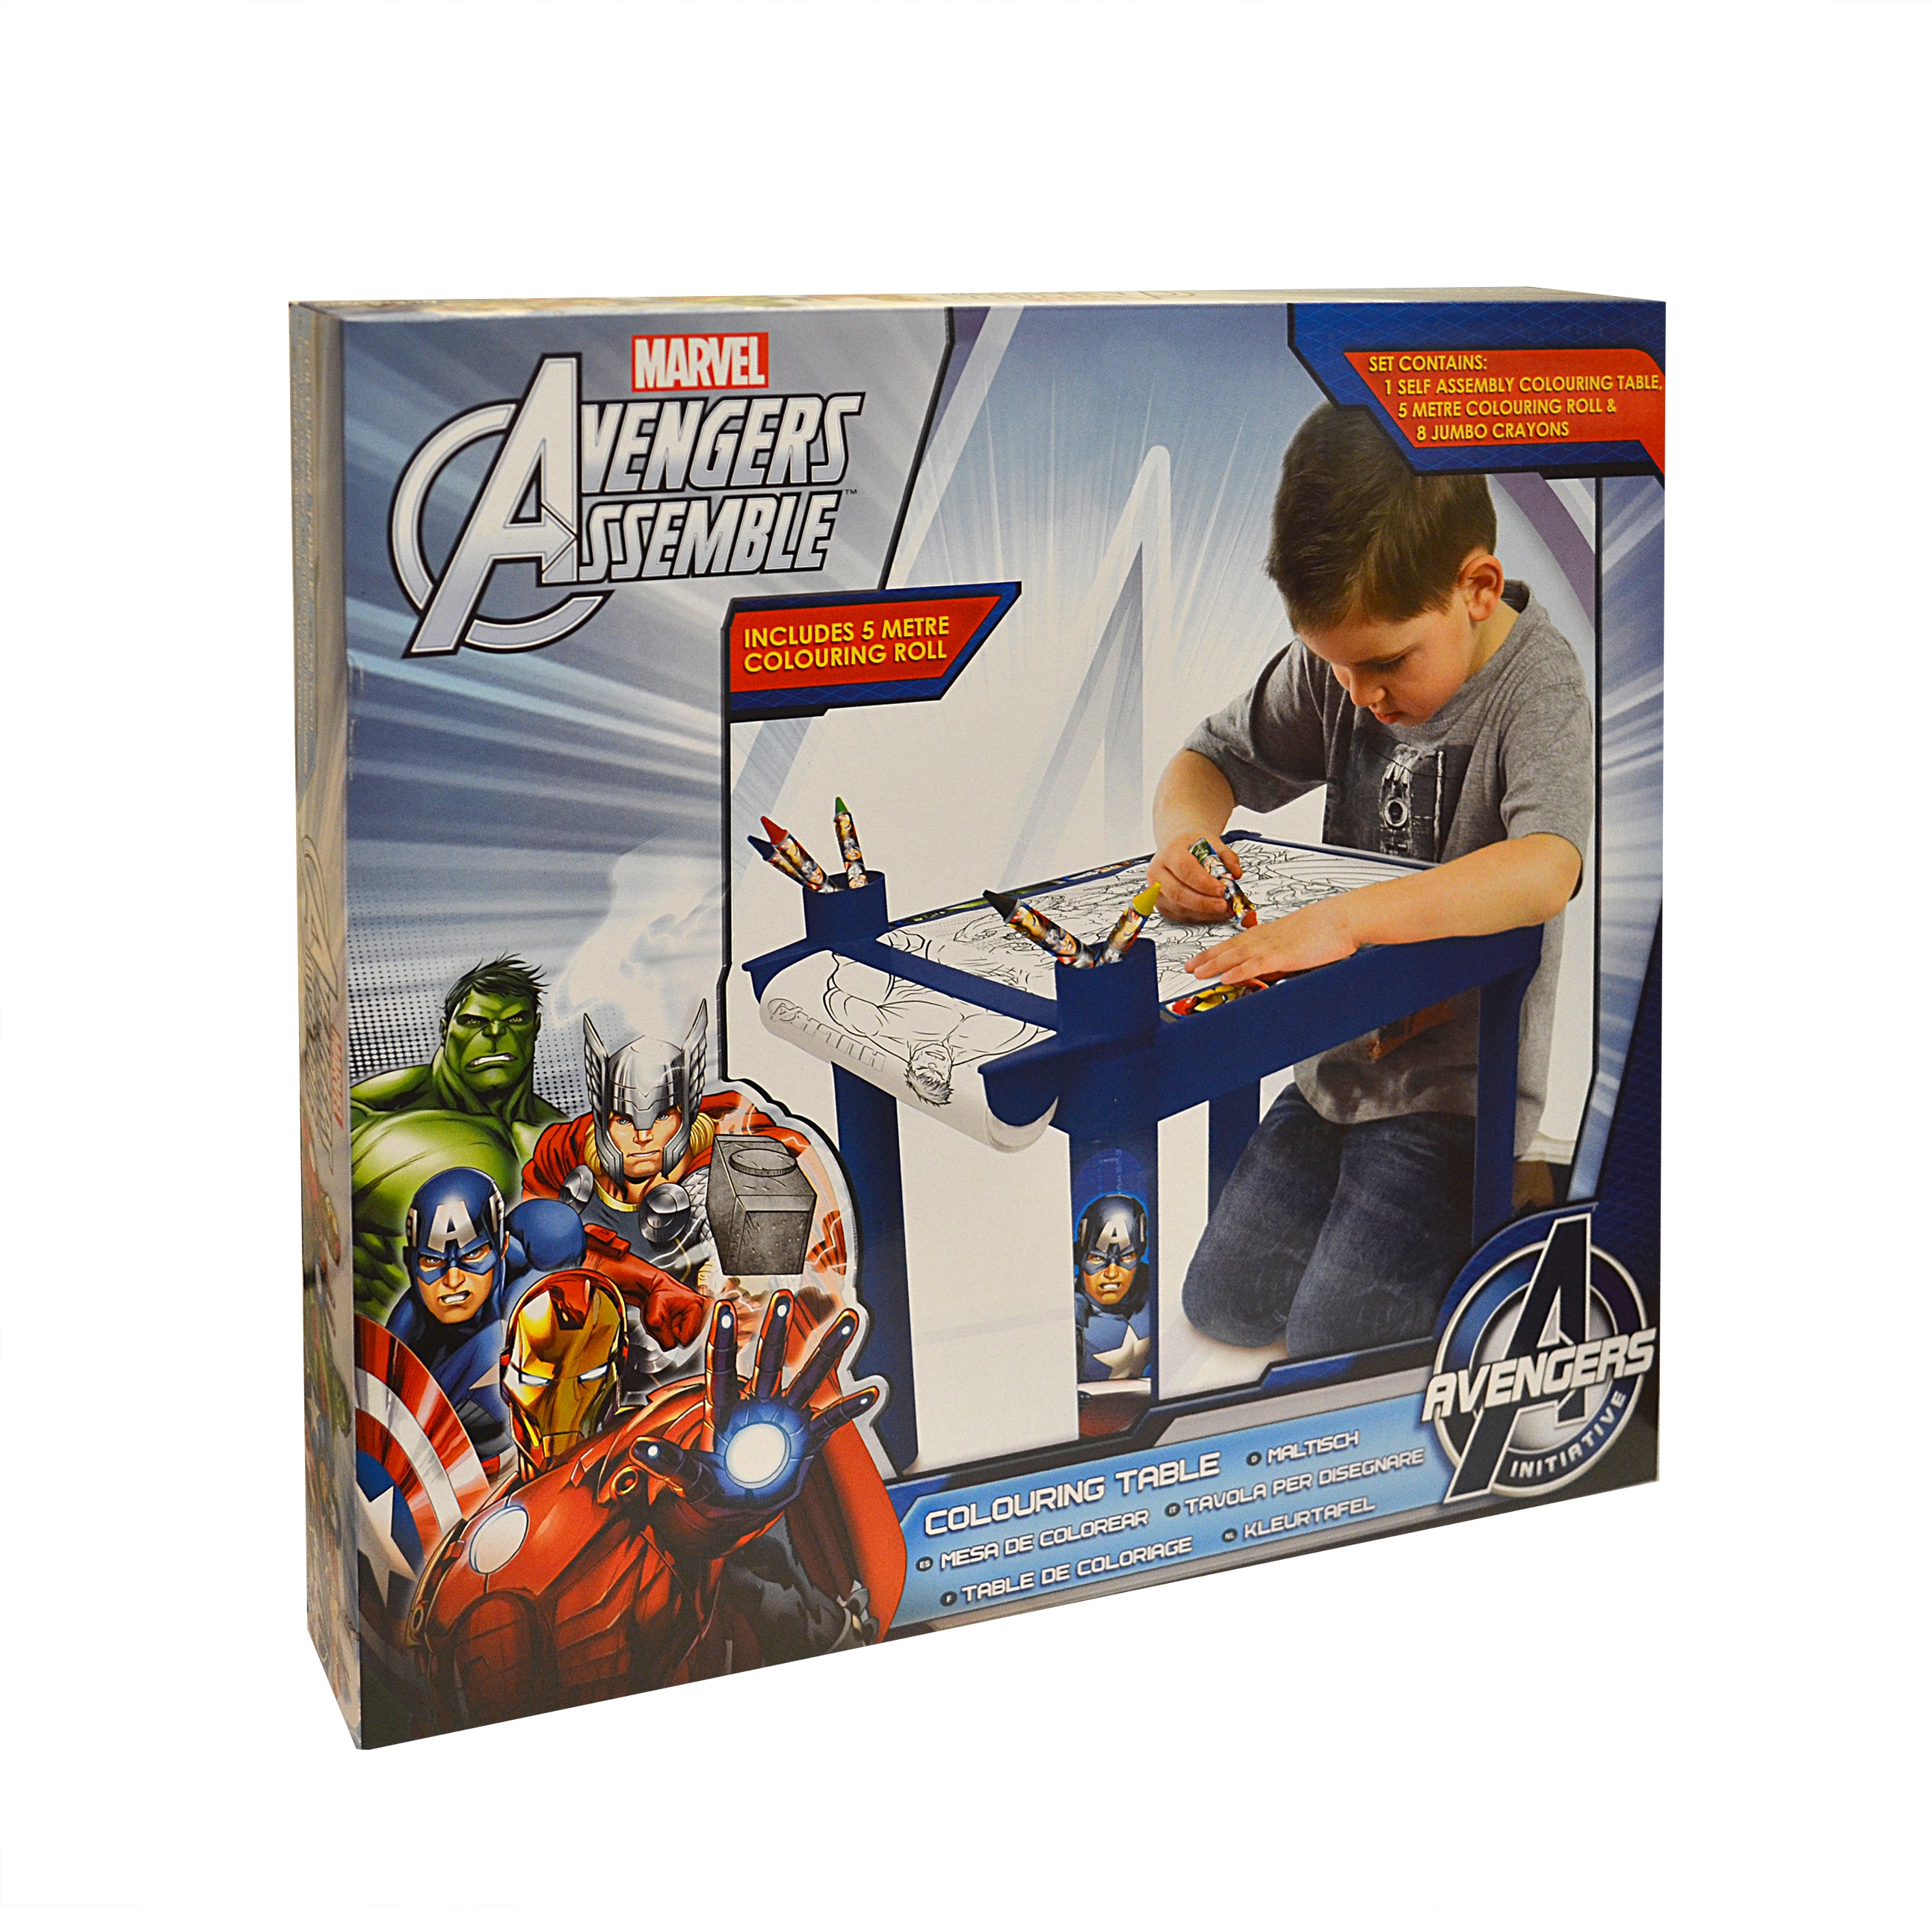 Marvel Avengers Assemble Colouring Table Stationery